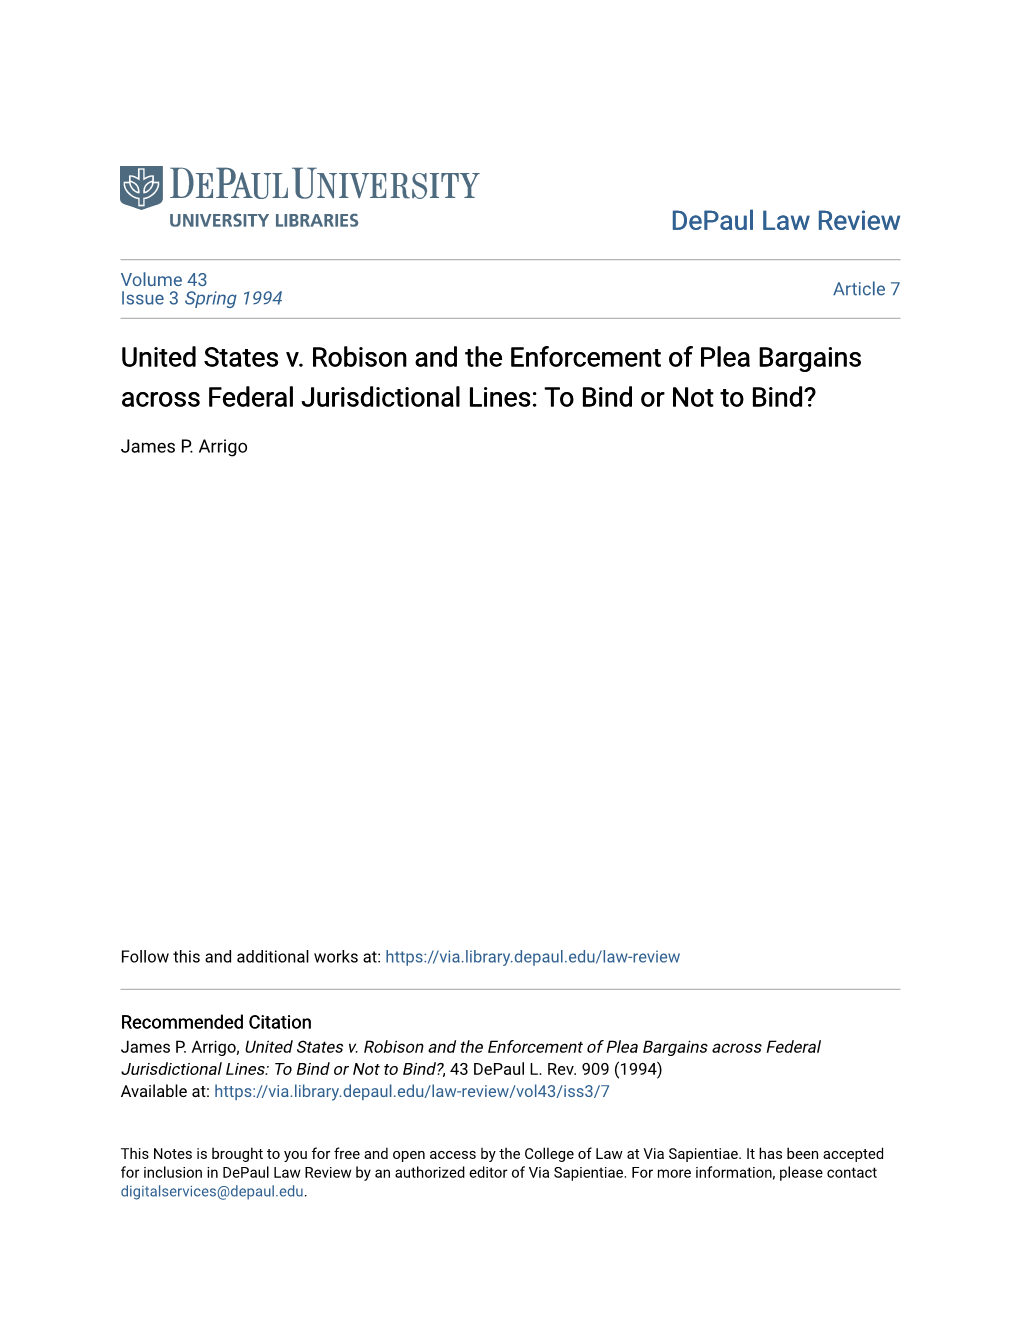 United States V. Robison and the Enforcement of Plea Bargains Across Federal Jurisdictional Lines: to Bind Or Not to Bind?